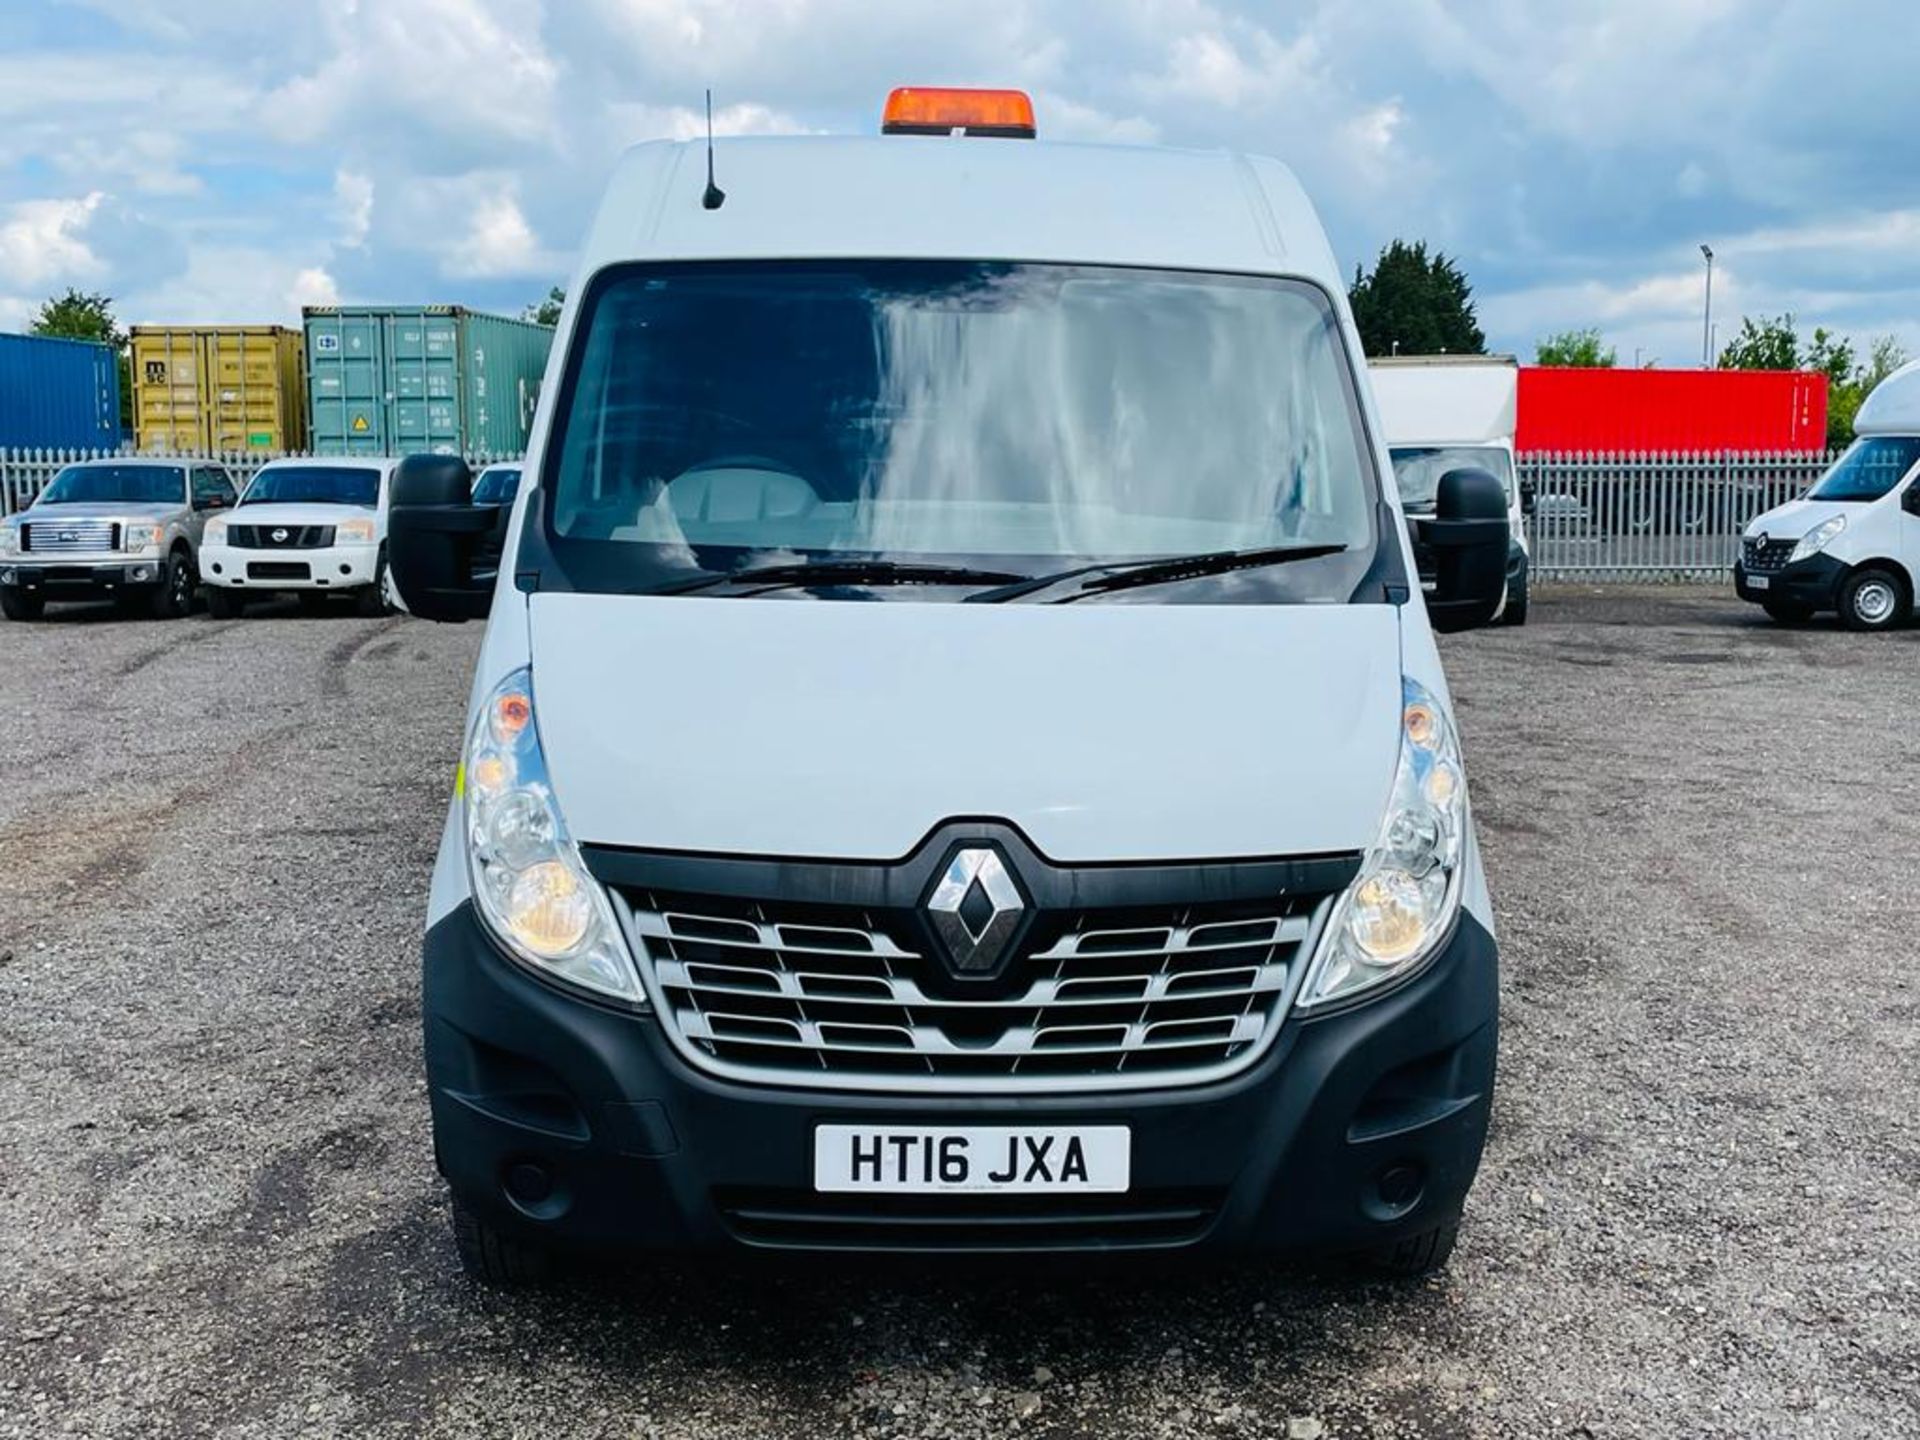 ** ON SALE ** Renault Master 2.3 DCI LMI35 Business L4 H2 RWD 2016 '16 Reg' Twin Rear Axle - 3500kg - Image 2 of 16